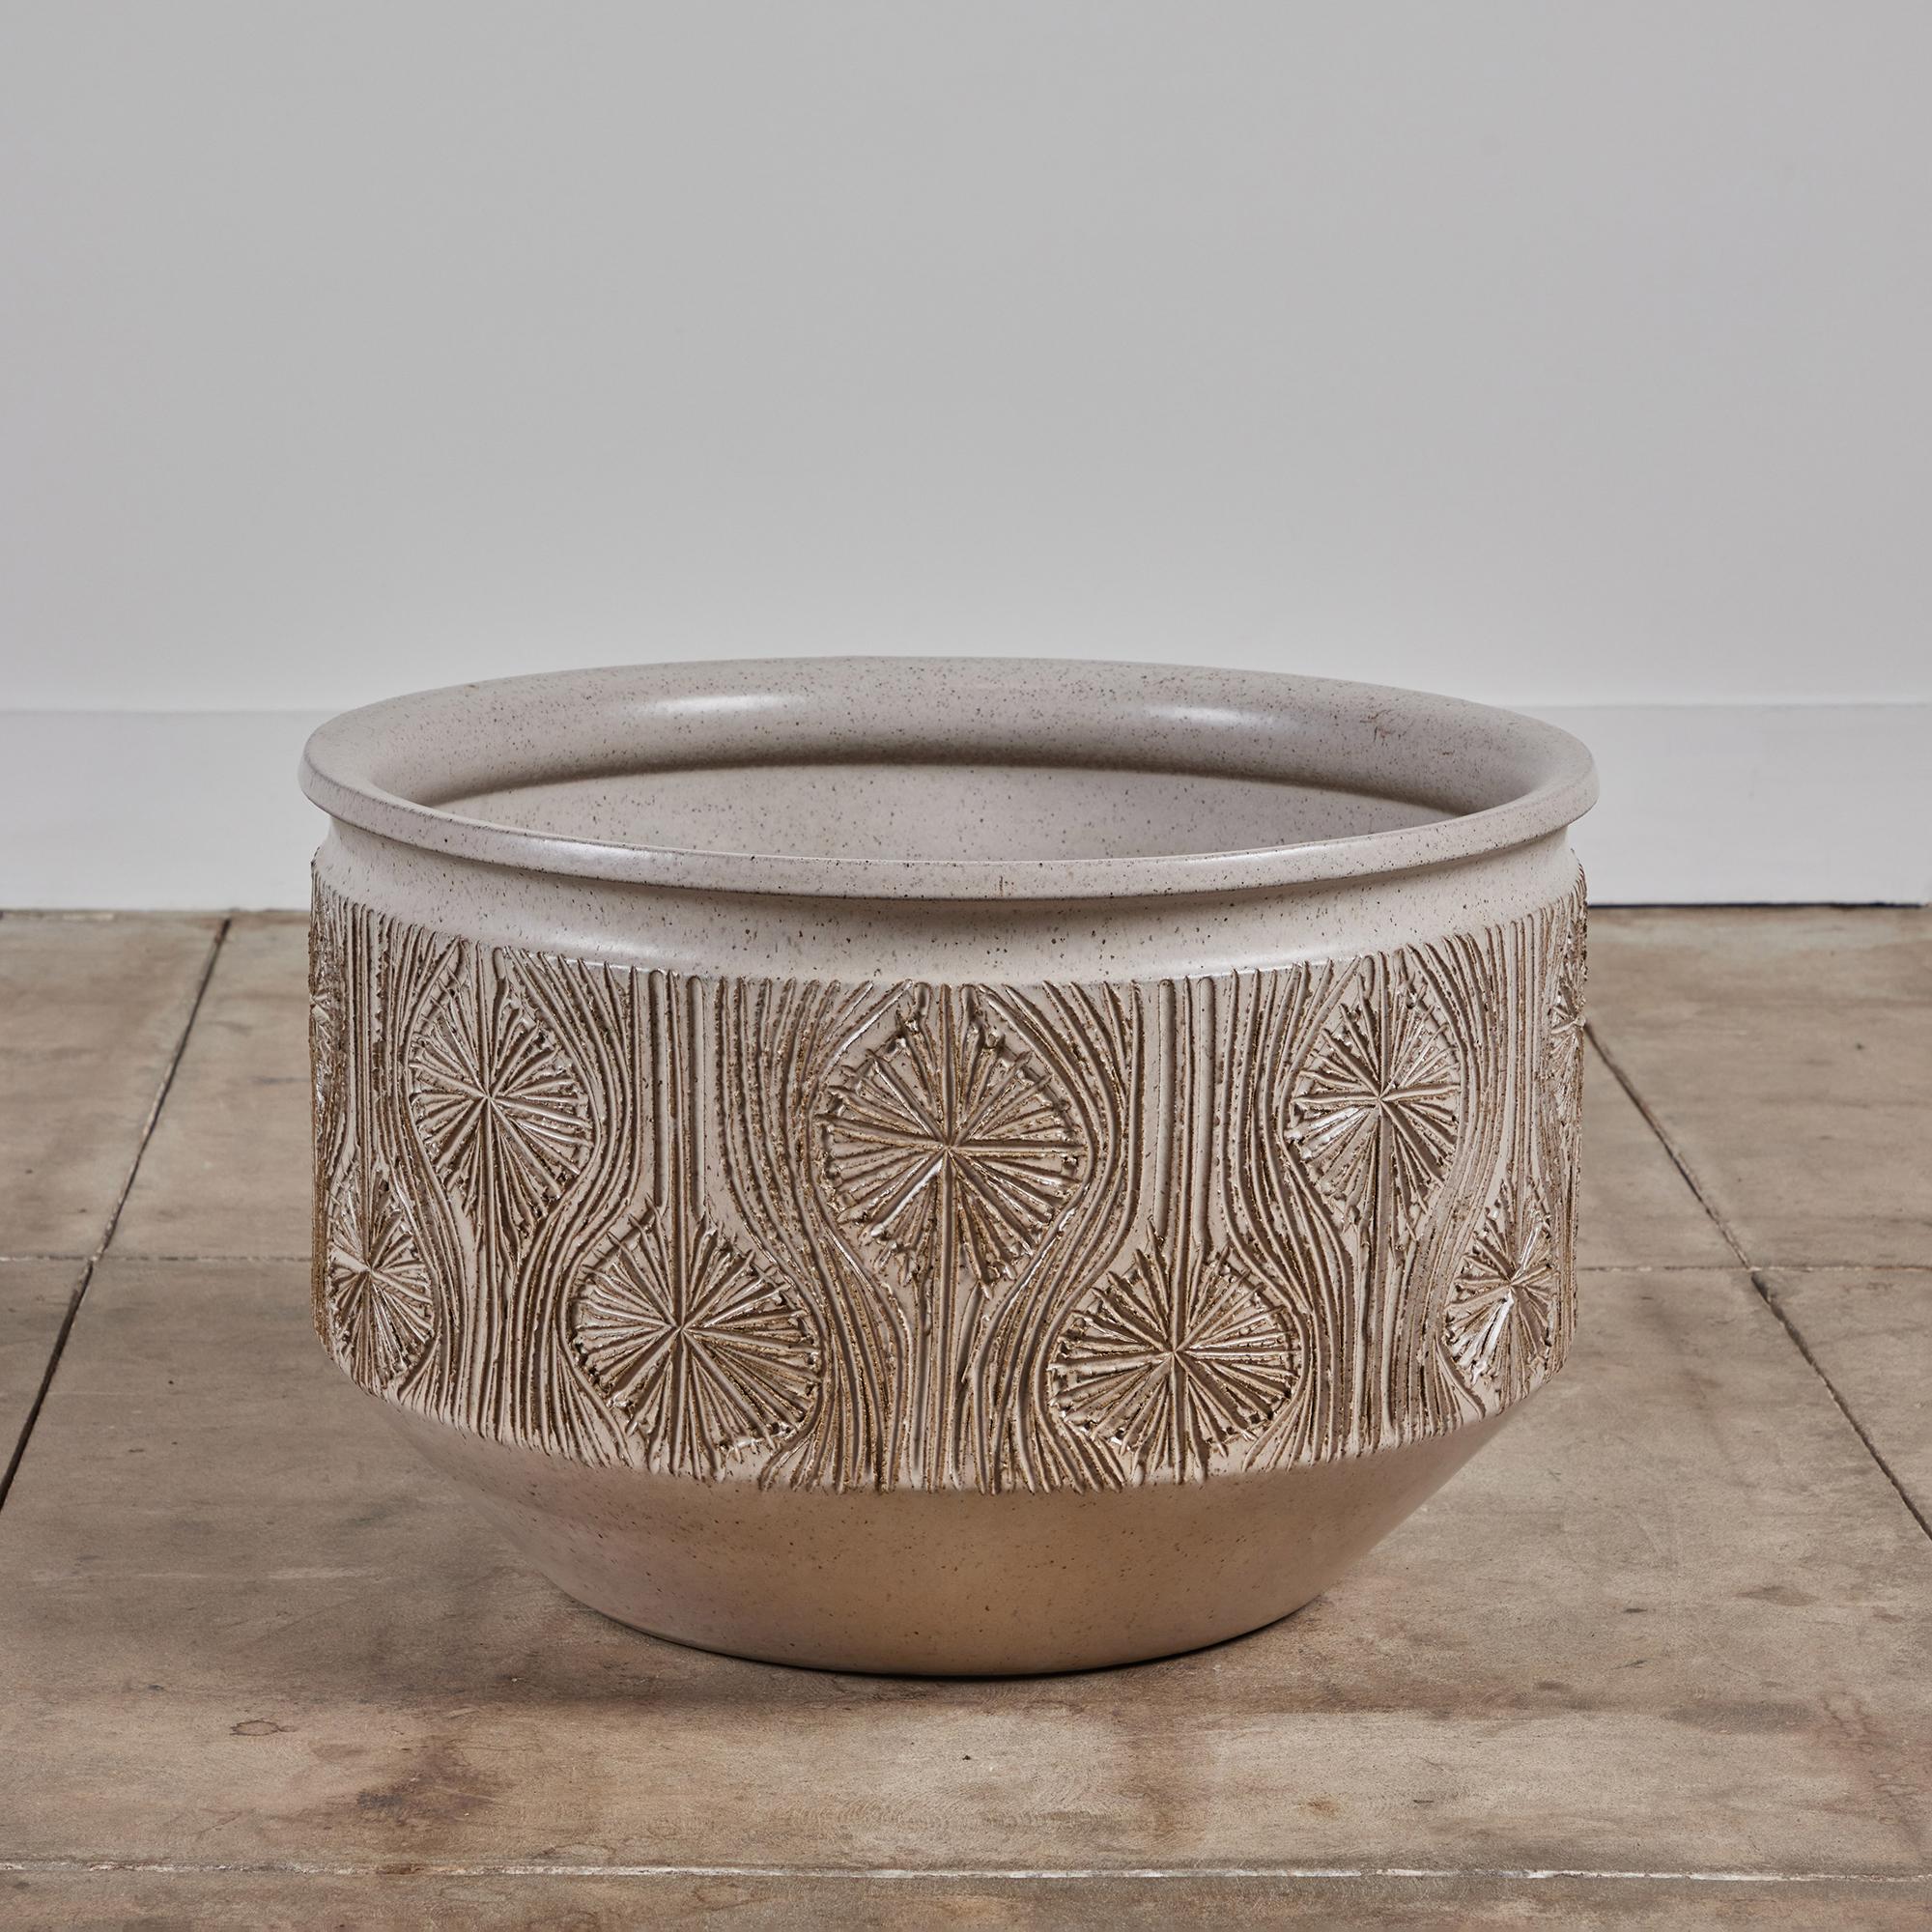 Bowl planter from Earthgender, David Cressey and Robert Maxwell’s early 1970s project. This 23.5” diameter example is incised in the “Teardrop Sunburst” design with interlocking gestural curves separating a pattern of lines radiating from a central